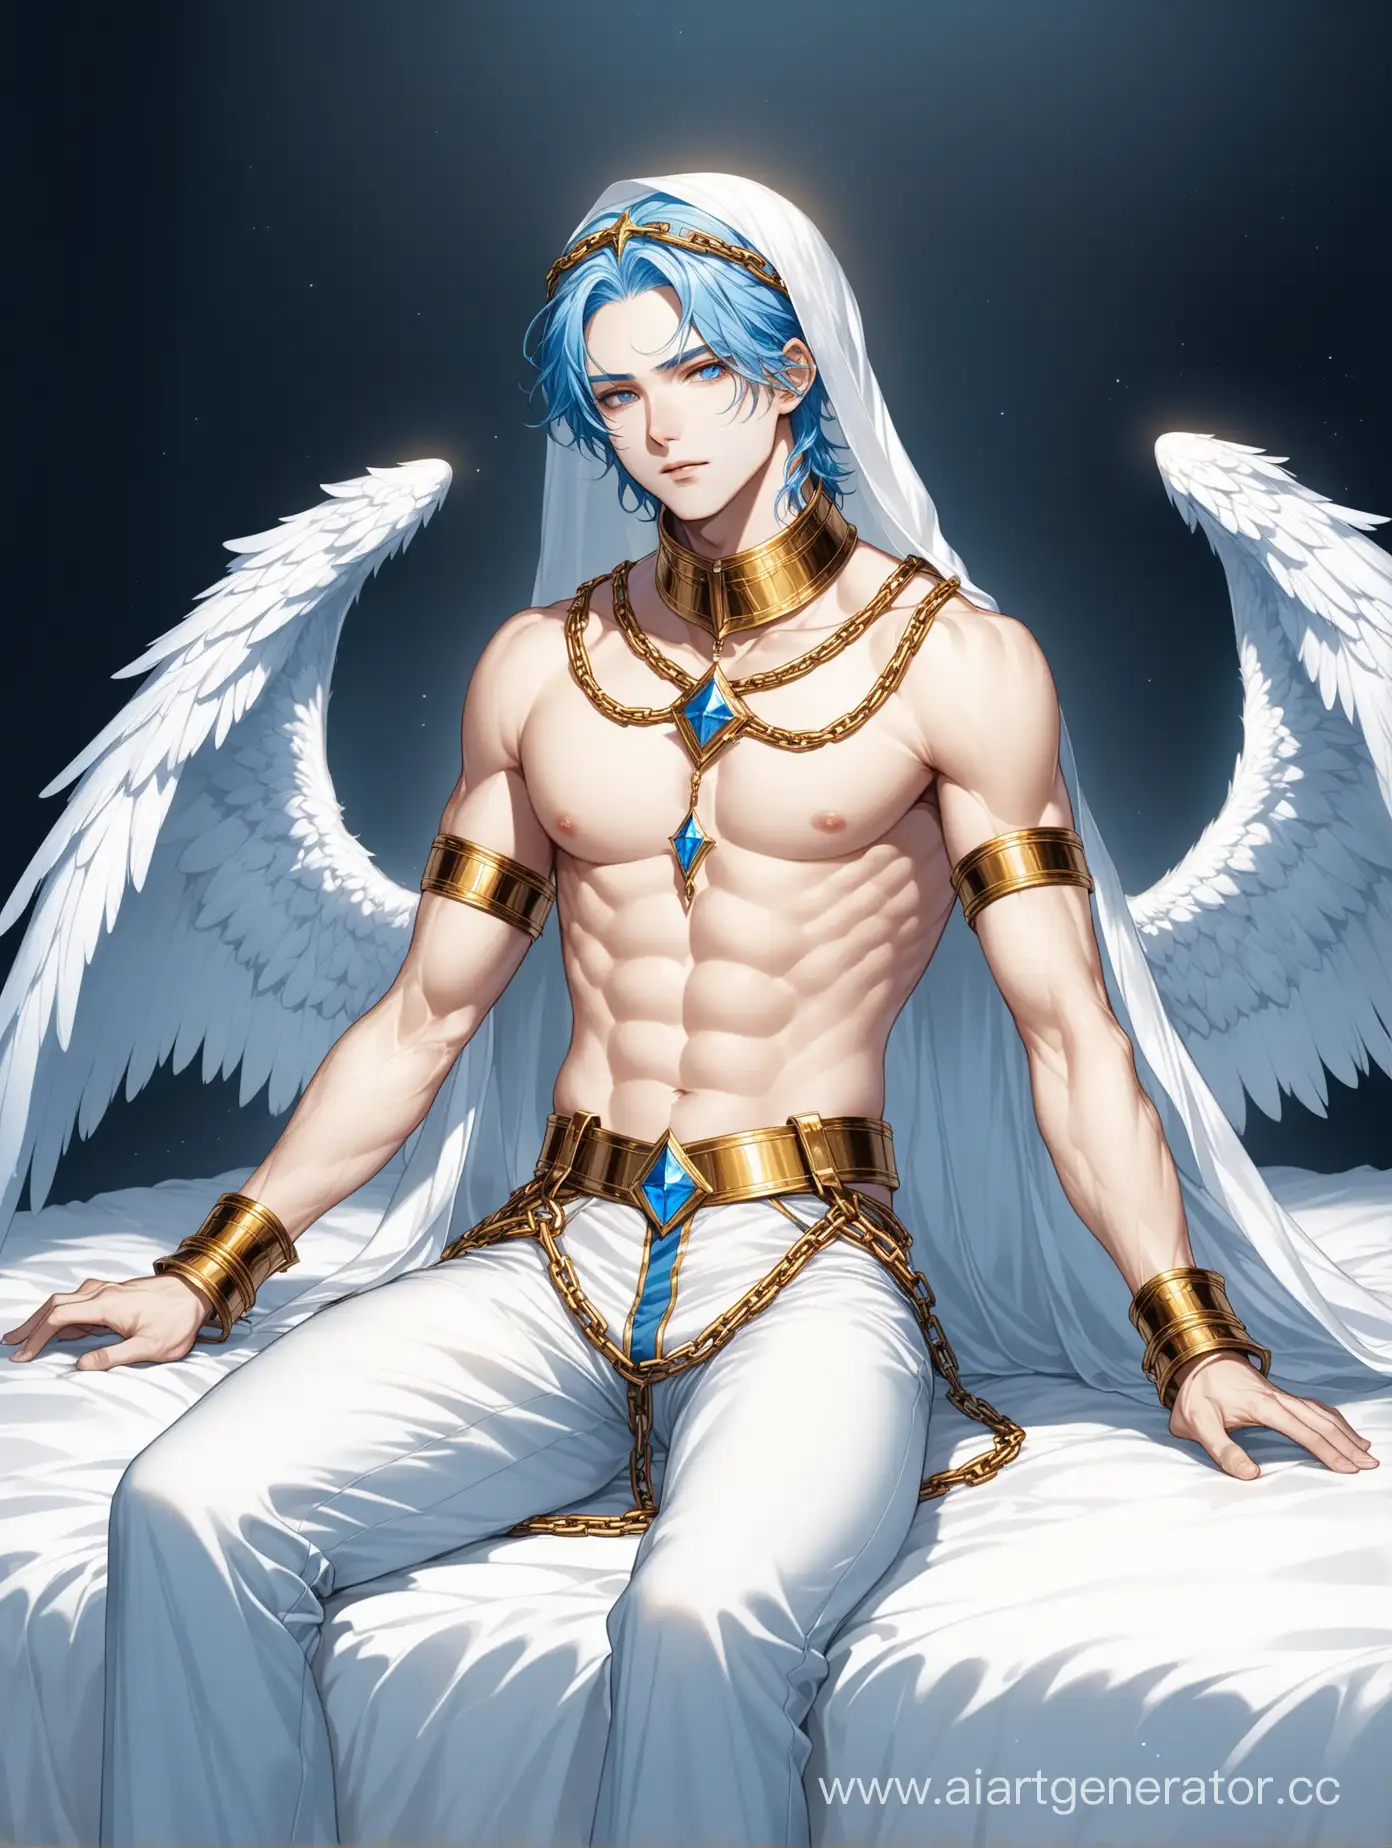 imagine a mysterious and bound, lost man lying on a bed with four white wings, light blue hair and golden unearthly eyes, decorated with white and blue silk clothes, gold chains crossed on his chest like a harness. a thick chain was located below the pectoral muscles, the back was open, and there was a white veil on the head The wide-leg trousers were just as risky in the same blue color, but with a slit that went from ankle to mid-thigh, leaving most of the skin visible from the side. The clothes left almost no room for imagination, patches of pale, milky white skin were on display,  Massive gold jewelry and the collar he's wearing on the bed